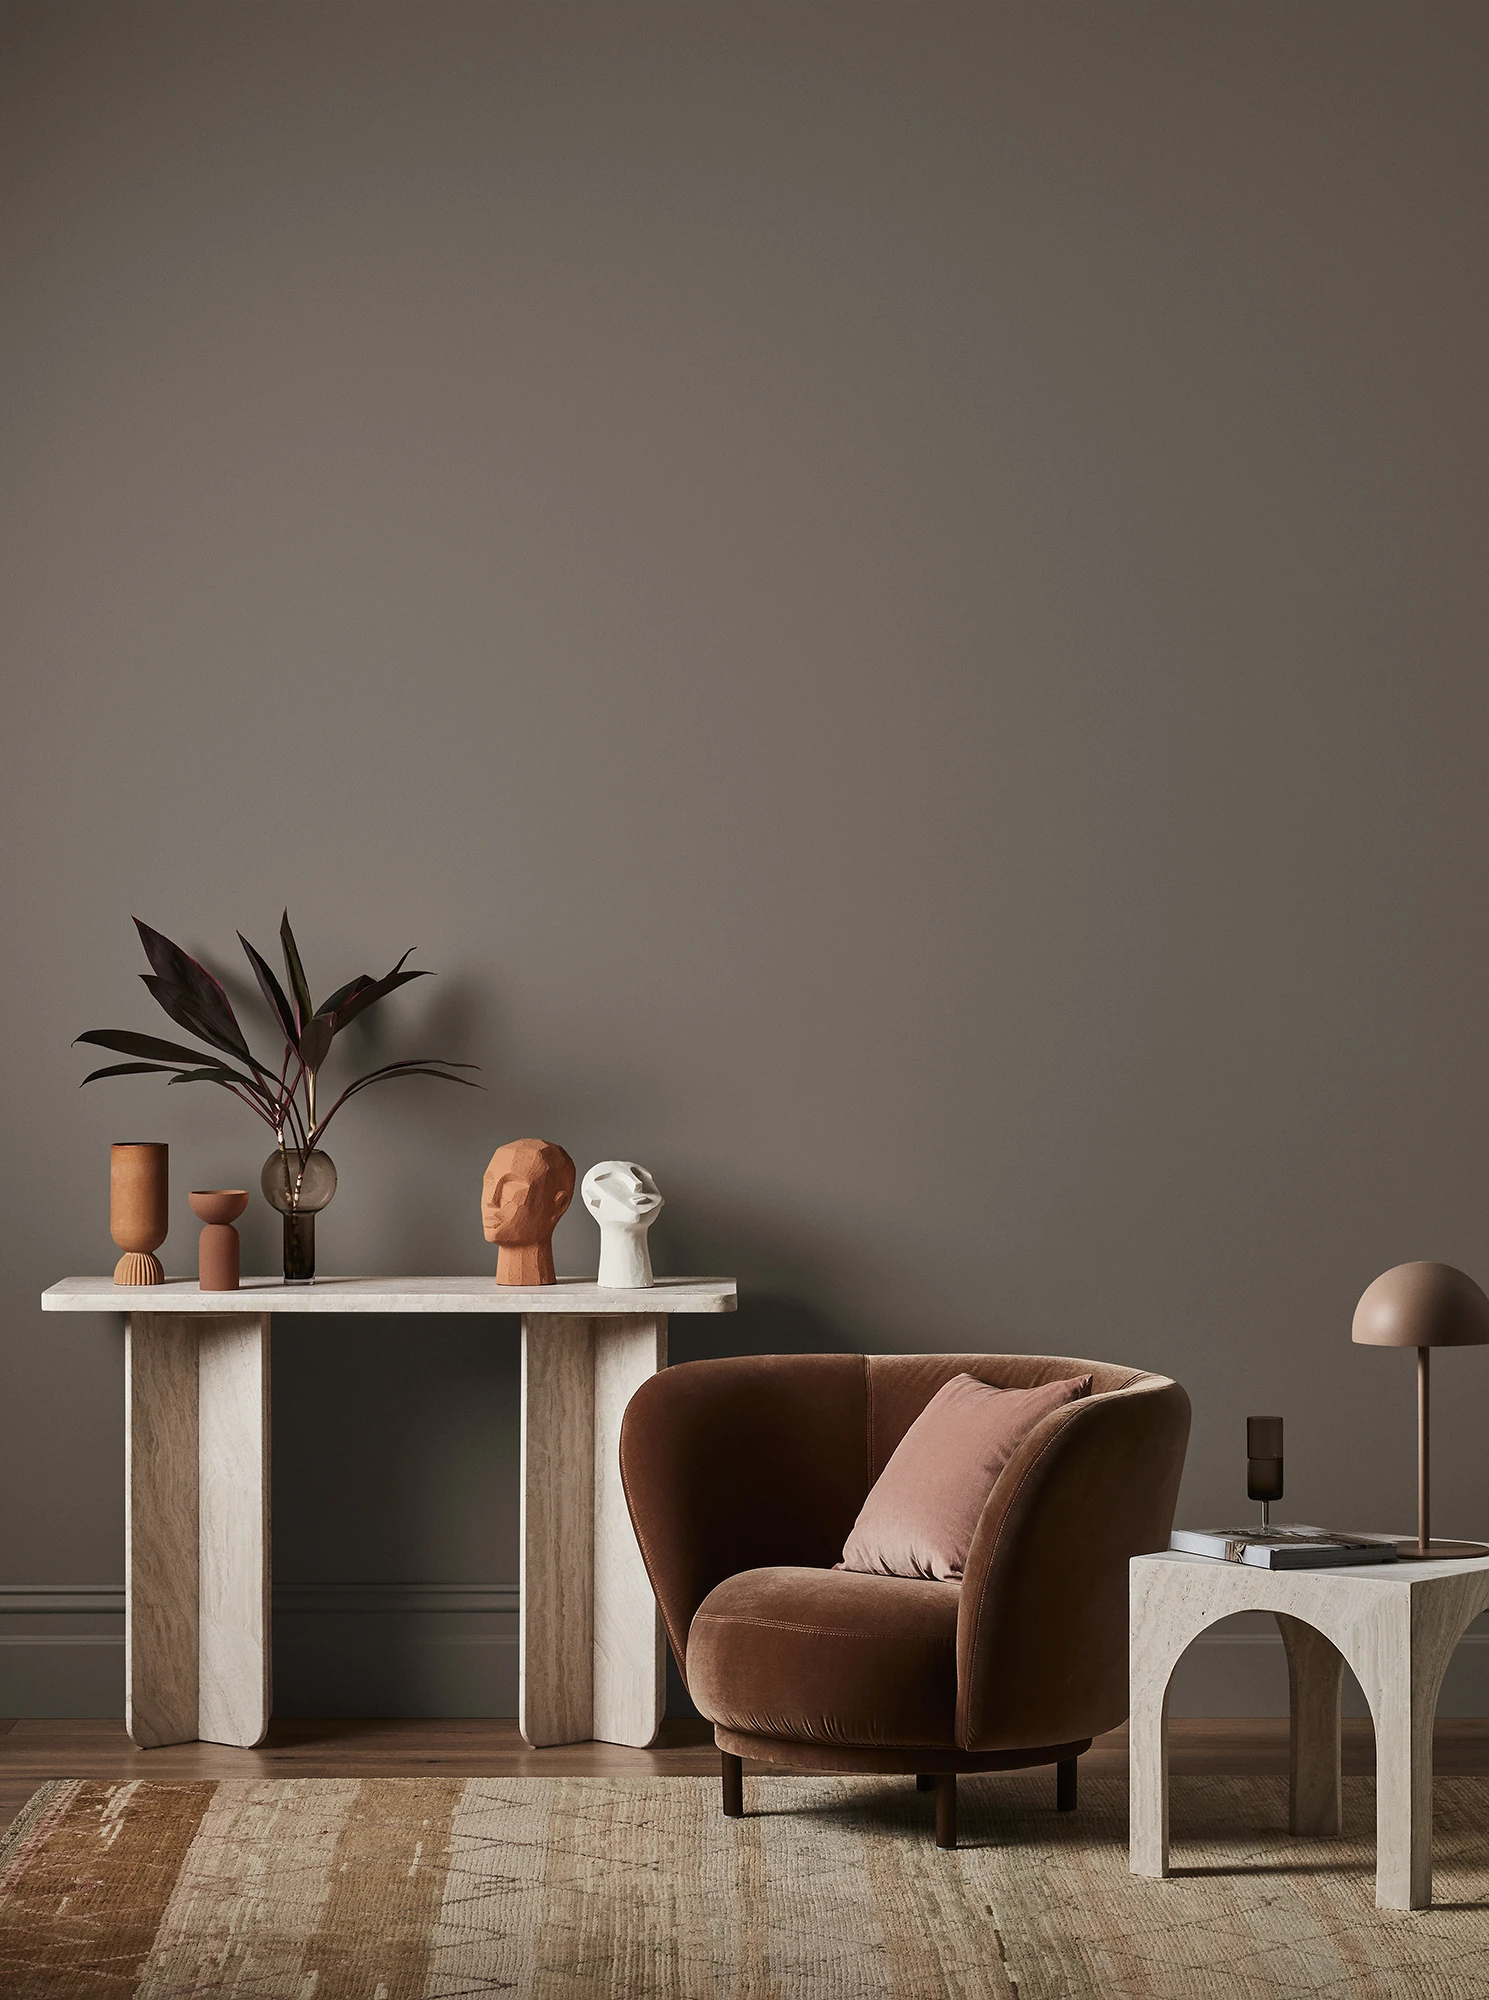 Dulux browns featuring on a wall with arm chair and hallway table with decorative items.